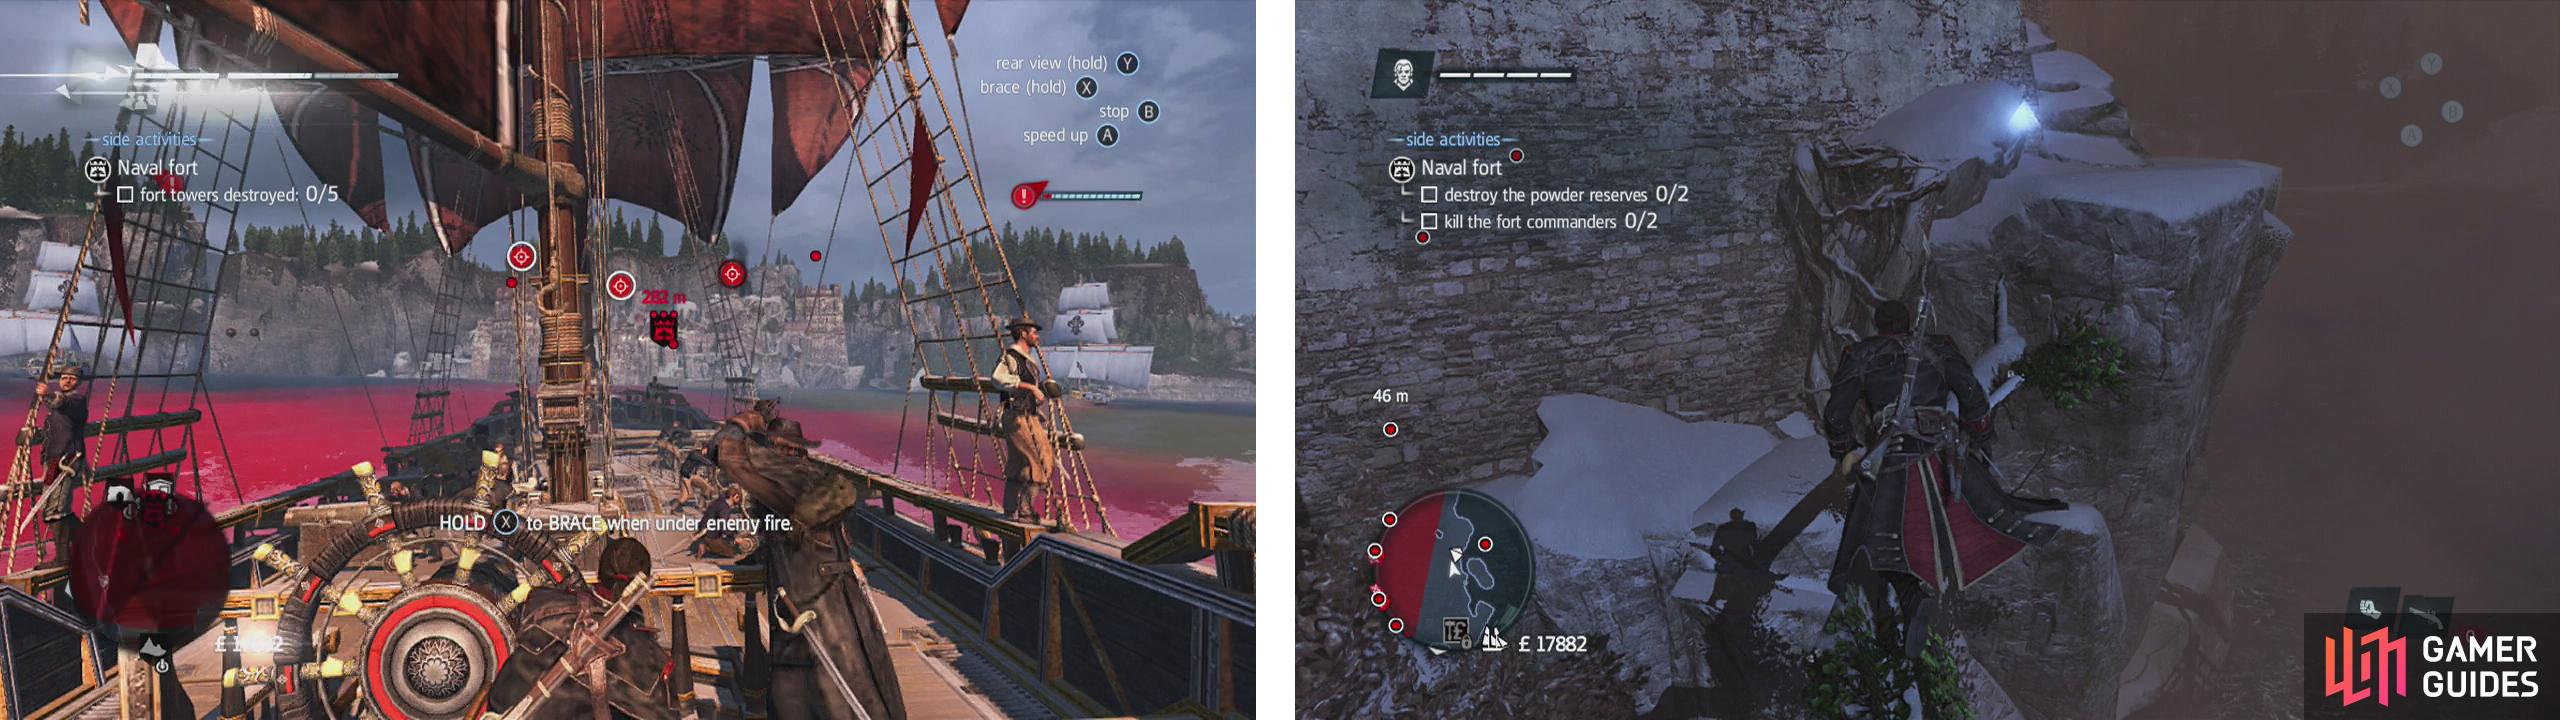 Instead of taking the fort head-on (left), draw the defending ships away. Once docked, use the tree-based pathway to the right of the gate (right) to enter the area sneakily.